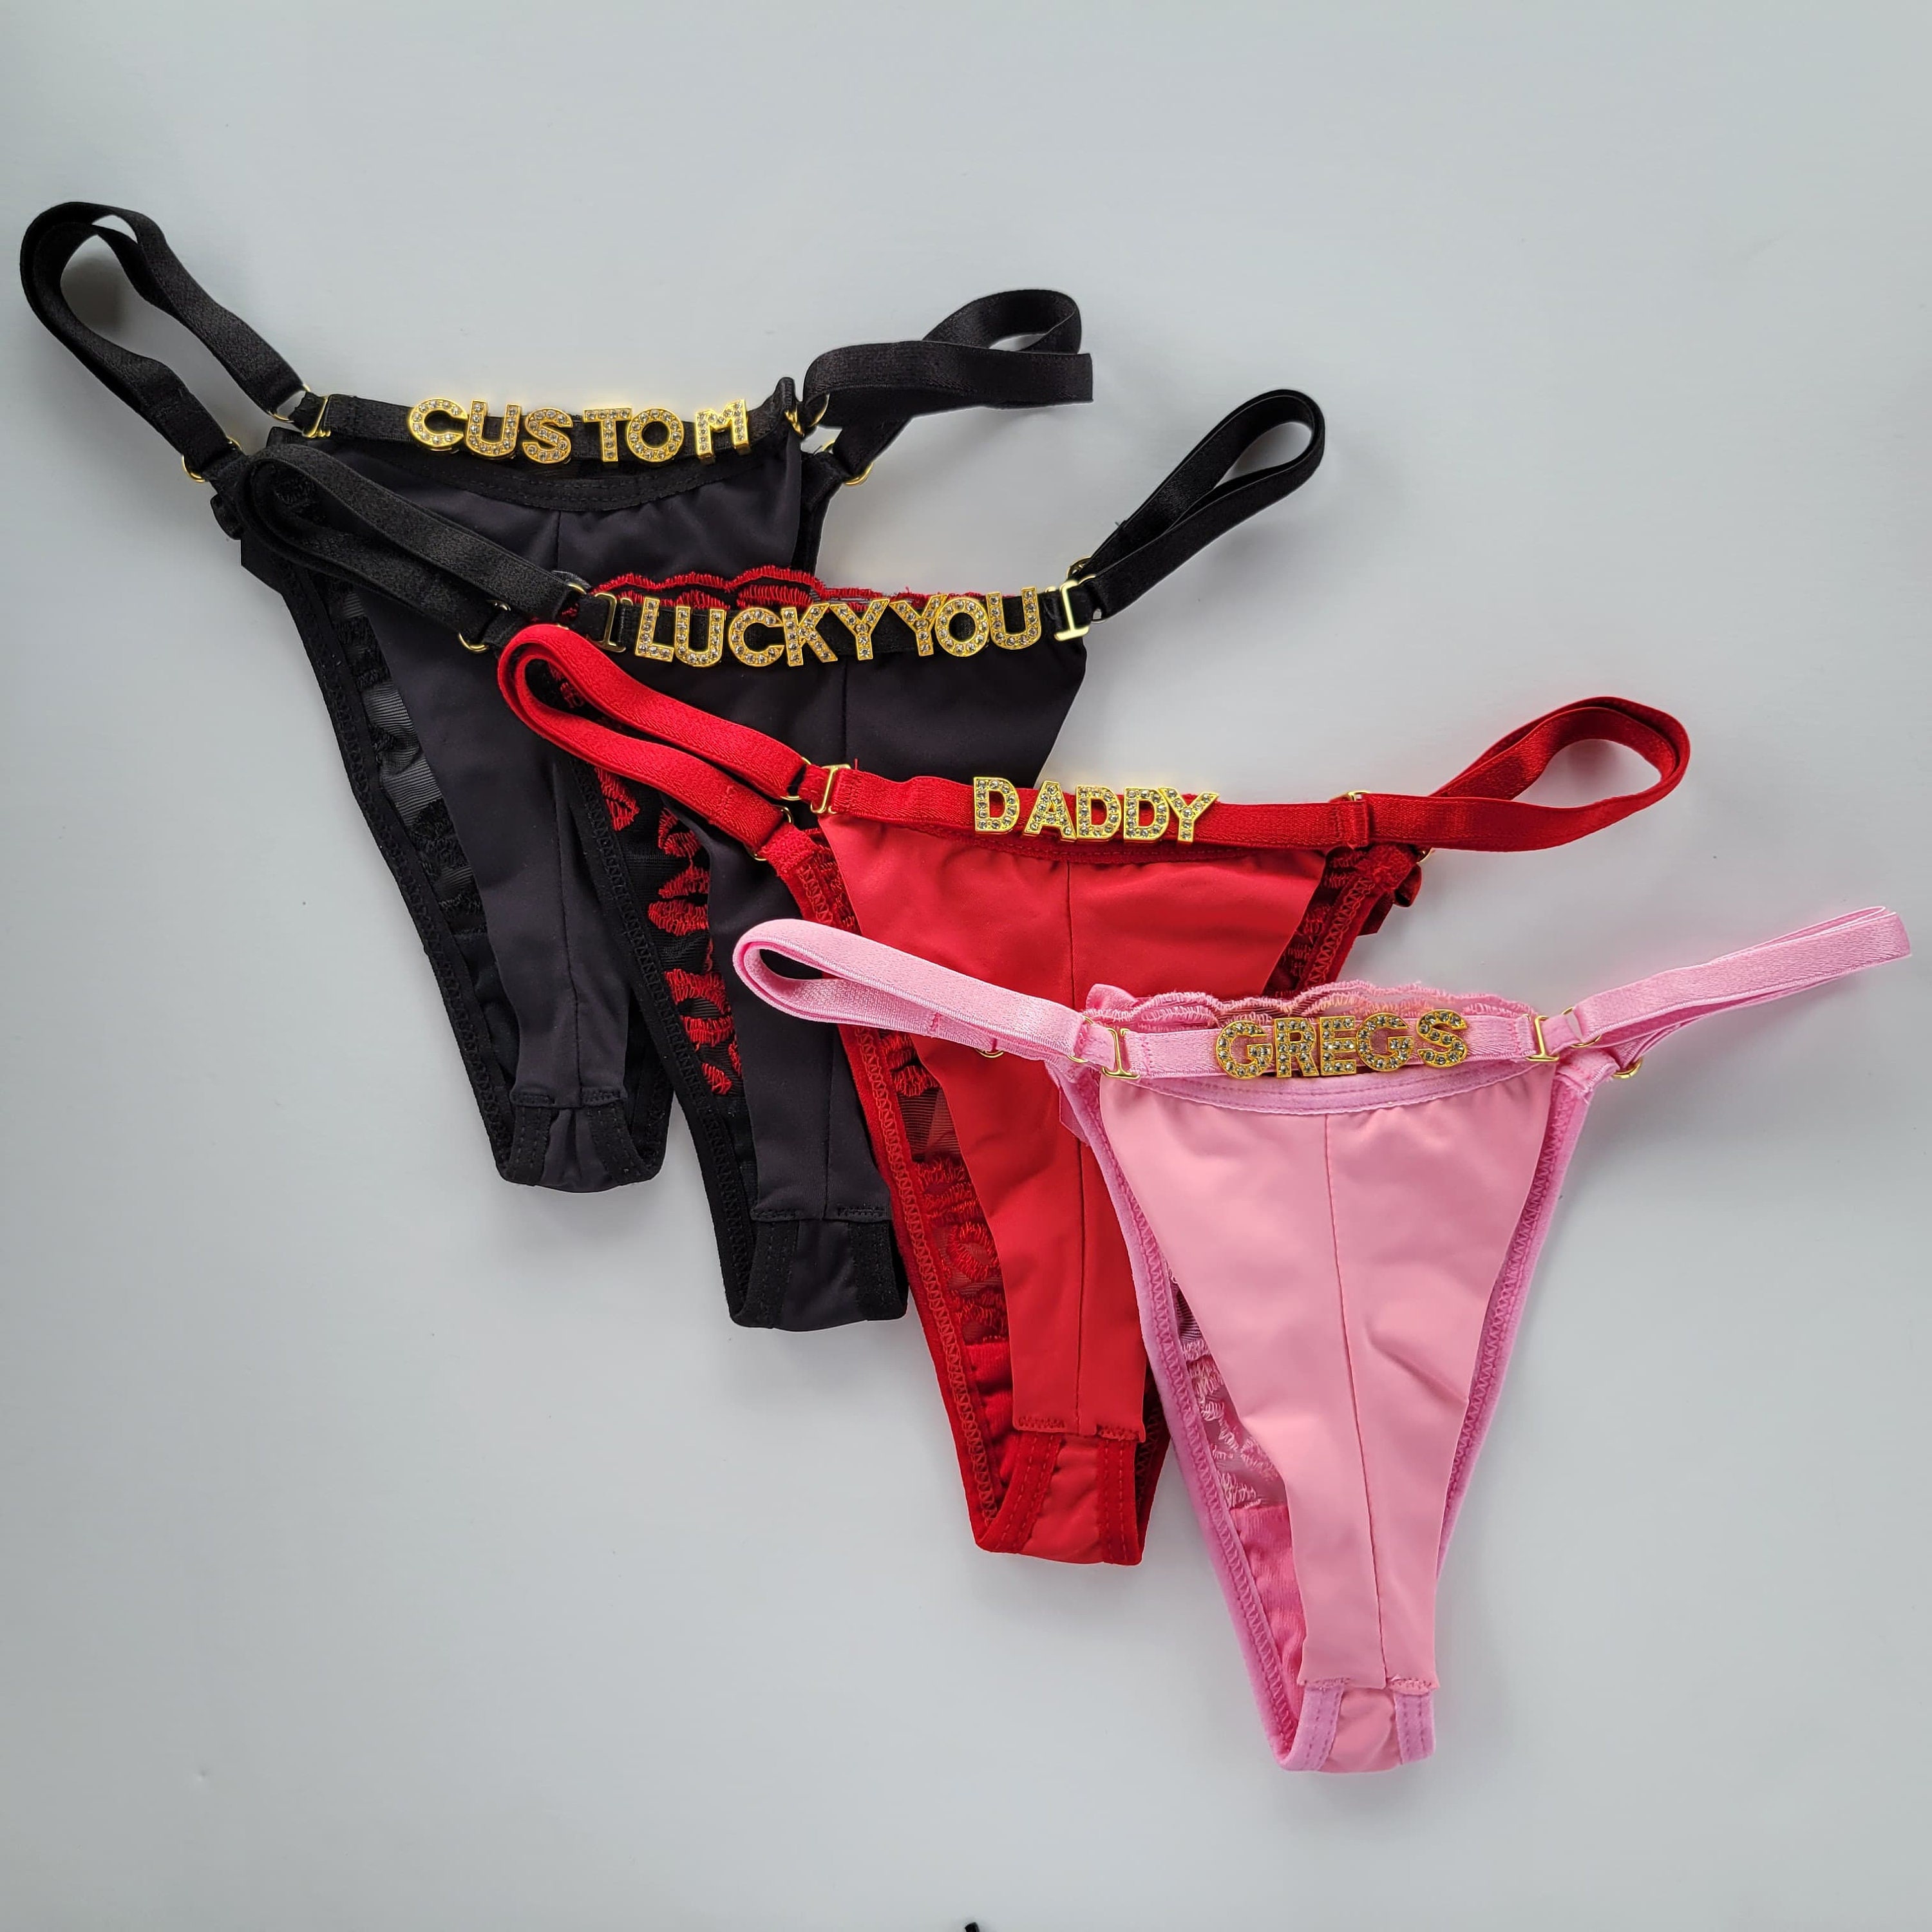 suprise your boyfriend with our custom thong with his name! 🔥 www